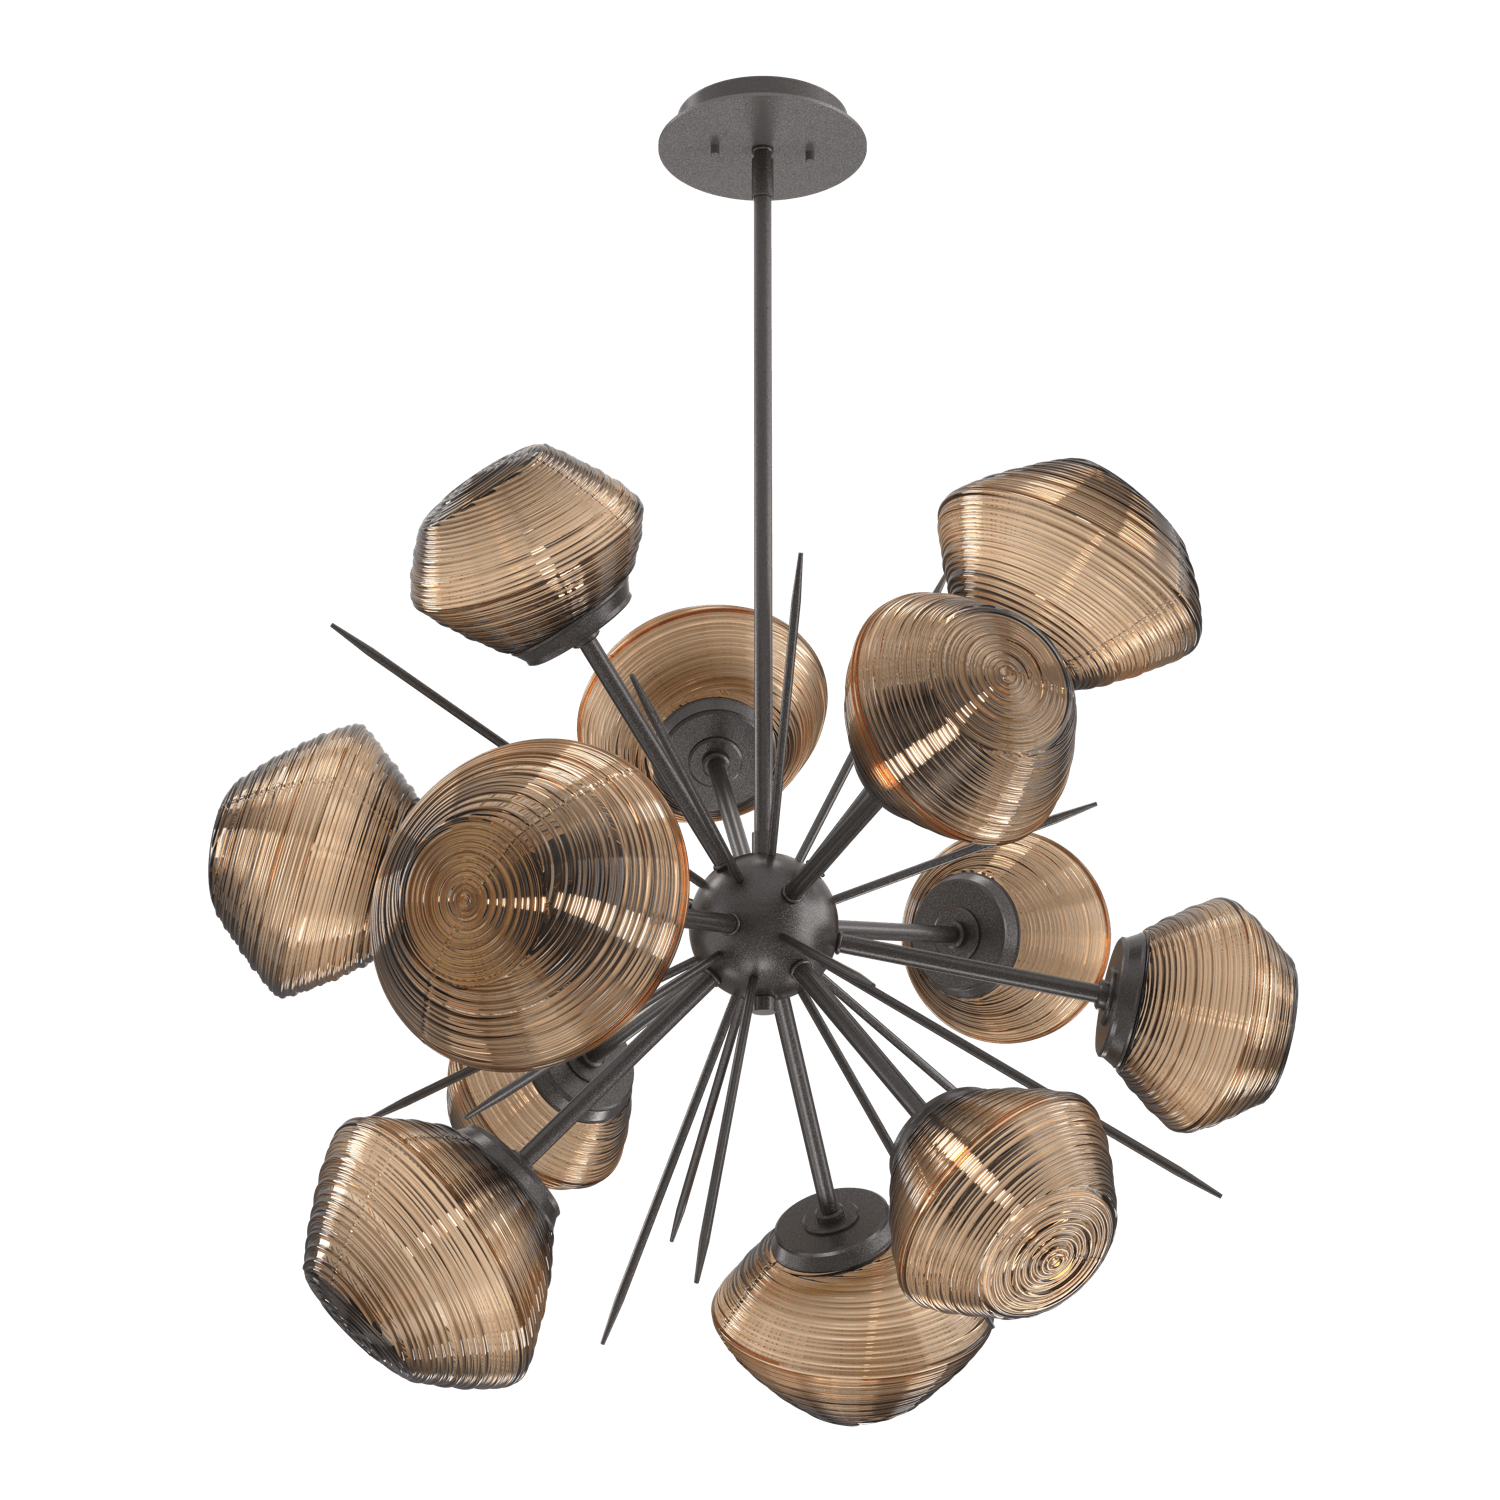 CHB0089-0G-GP-B-Hammerton-Studio-Mesa-36-inch-starburst-chandelier-with-graphite-finish-and-bronze-blown-glass-shades-and-LED-lamping